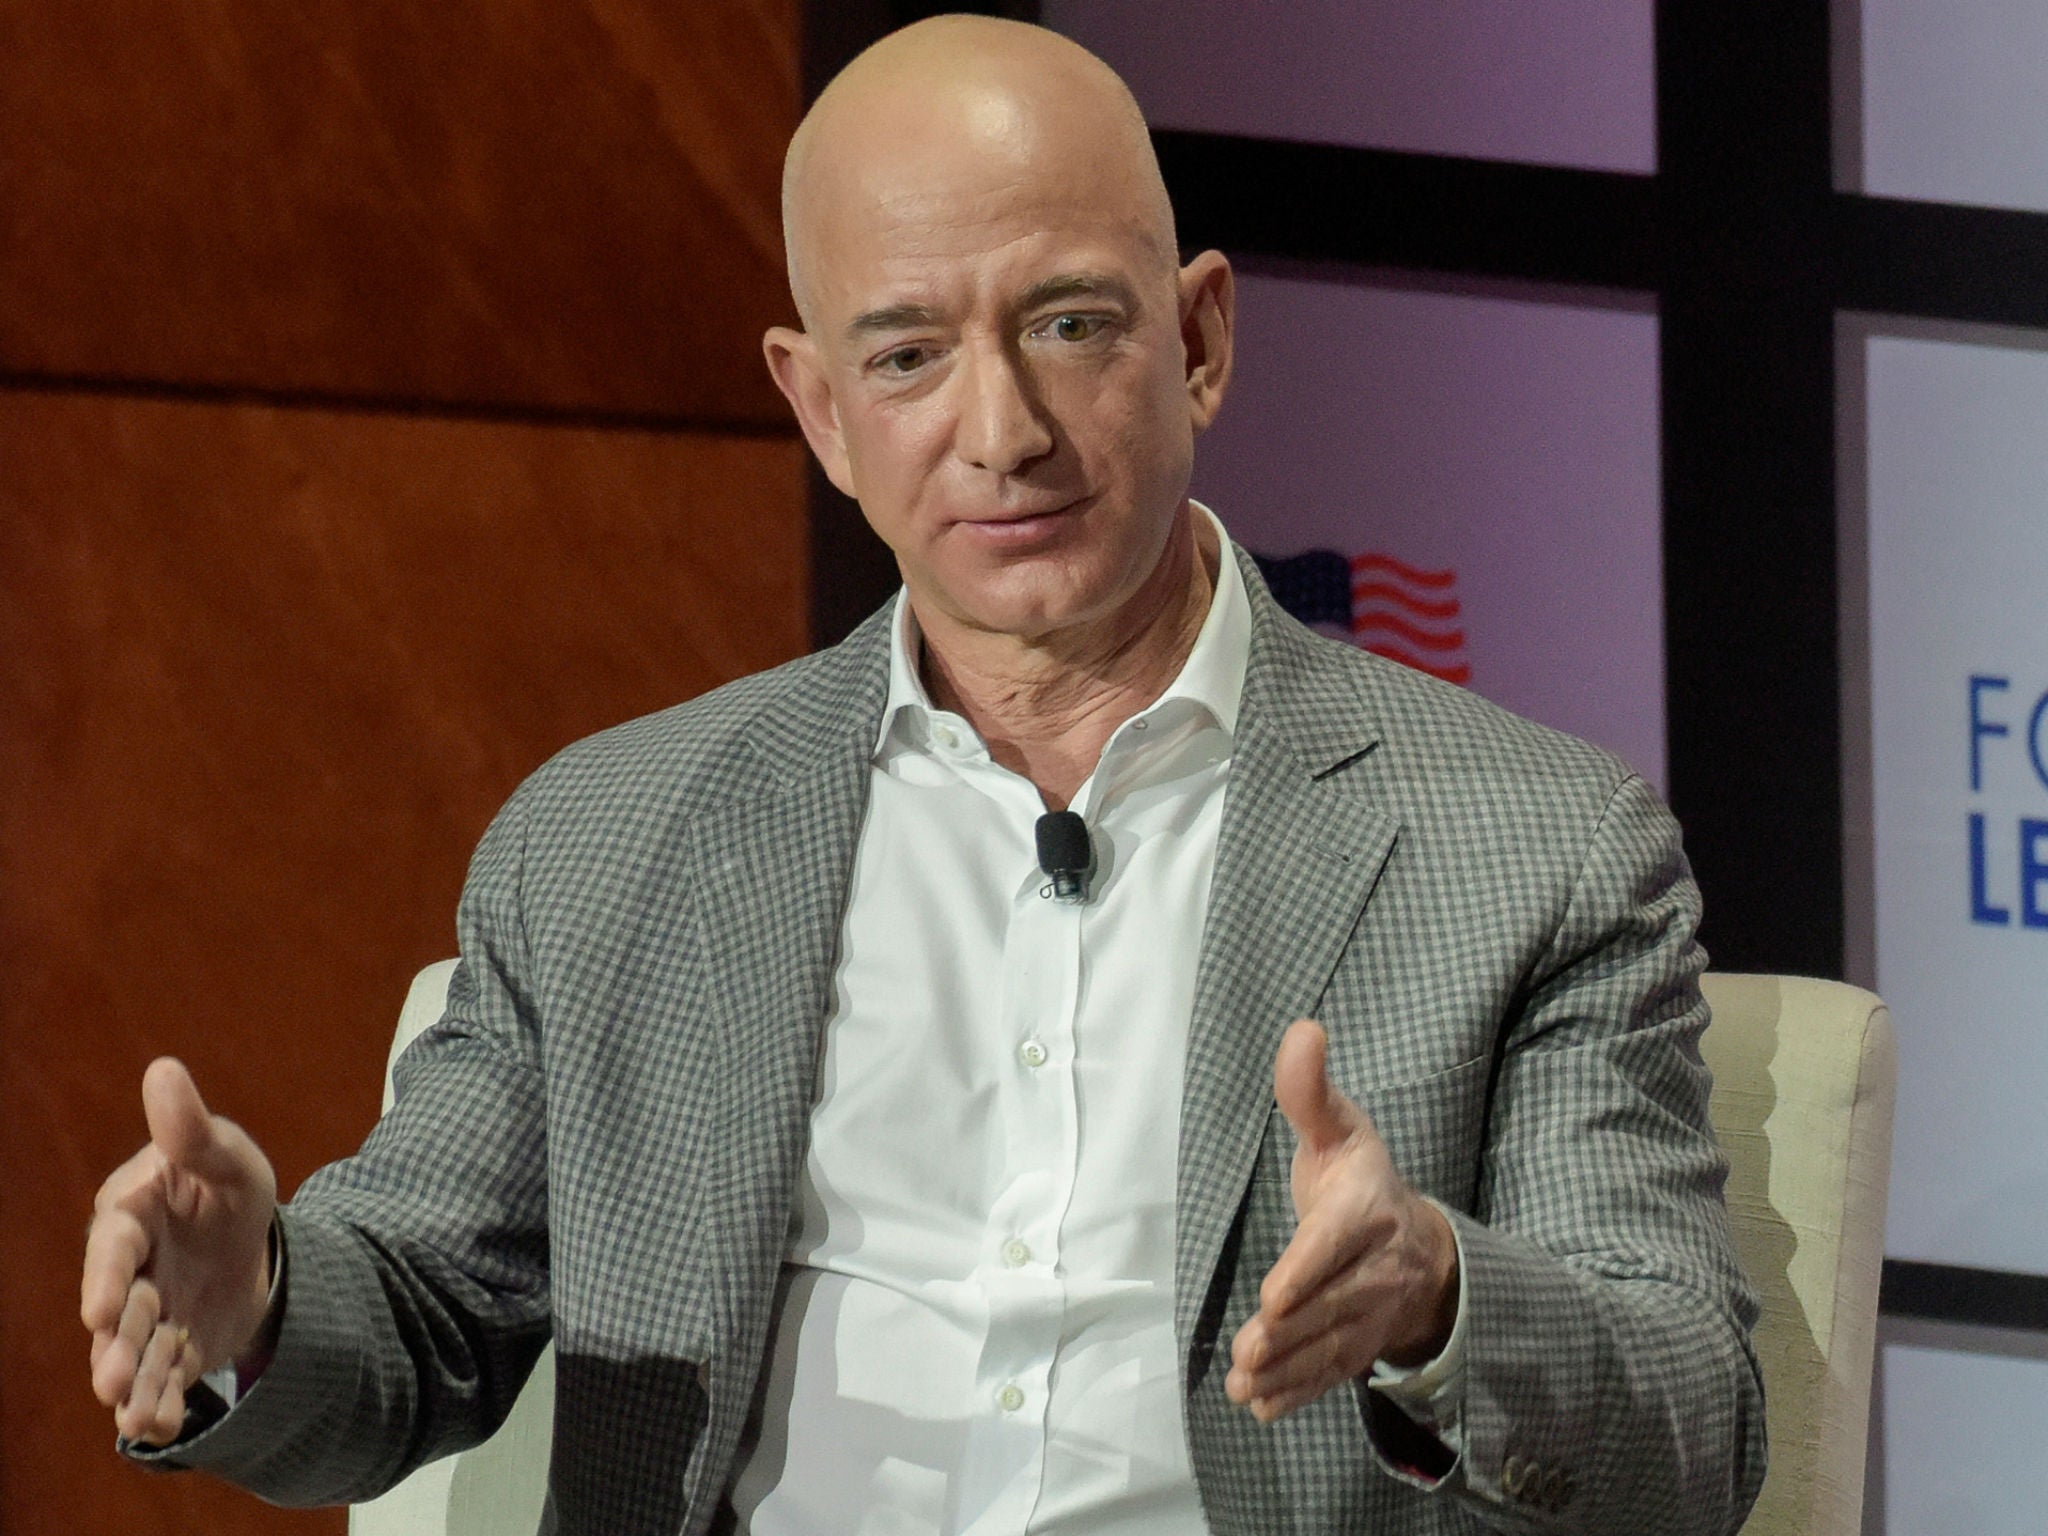 A letter to Amazon CEO Jeff Bezos warns a facial recognition tool is delivering 'dangerous surveillance powers directly to the government'.